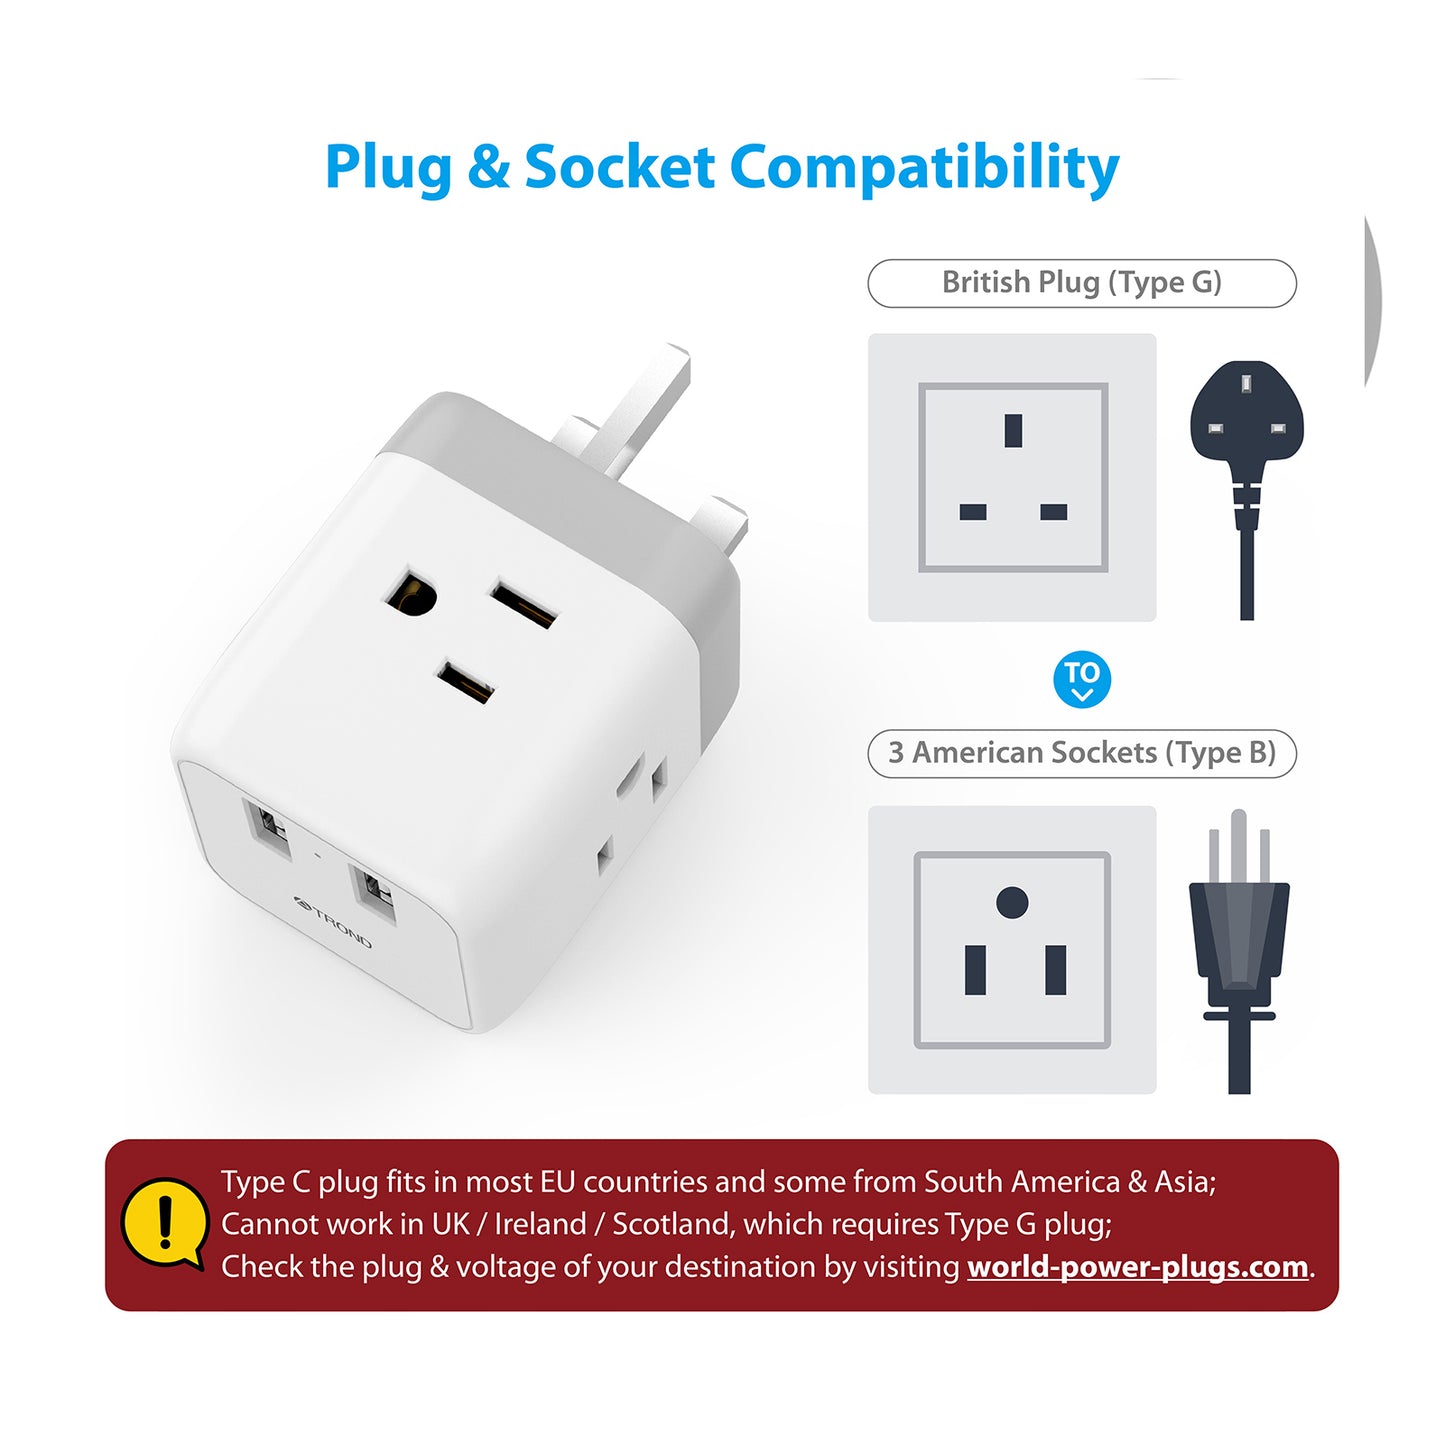 Travel Plug Adapter for US to UK 2Pack